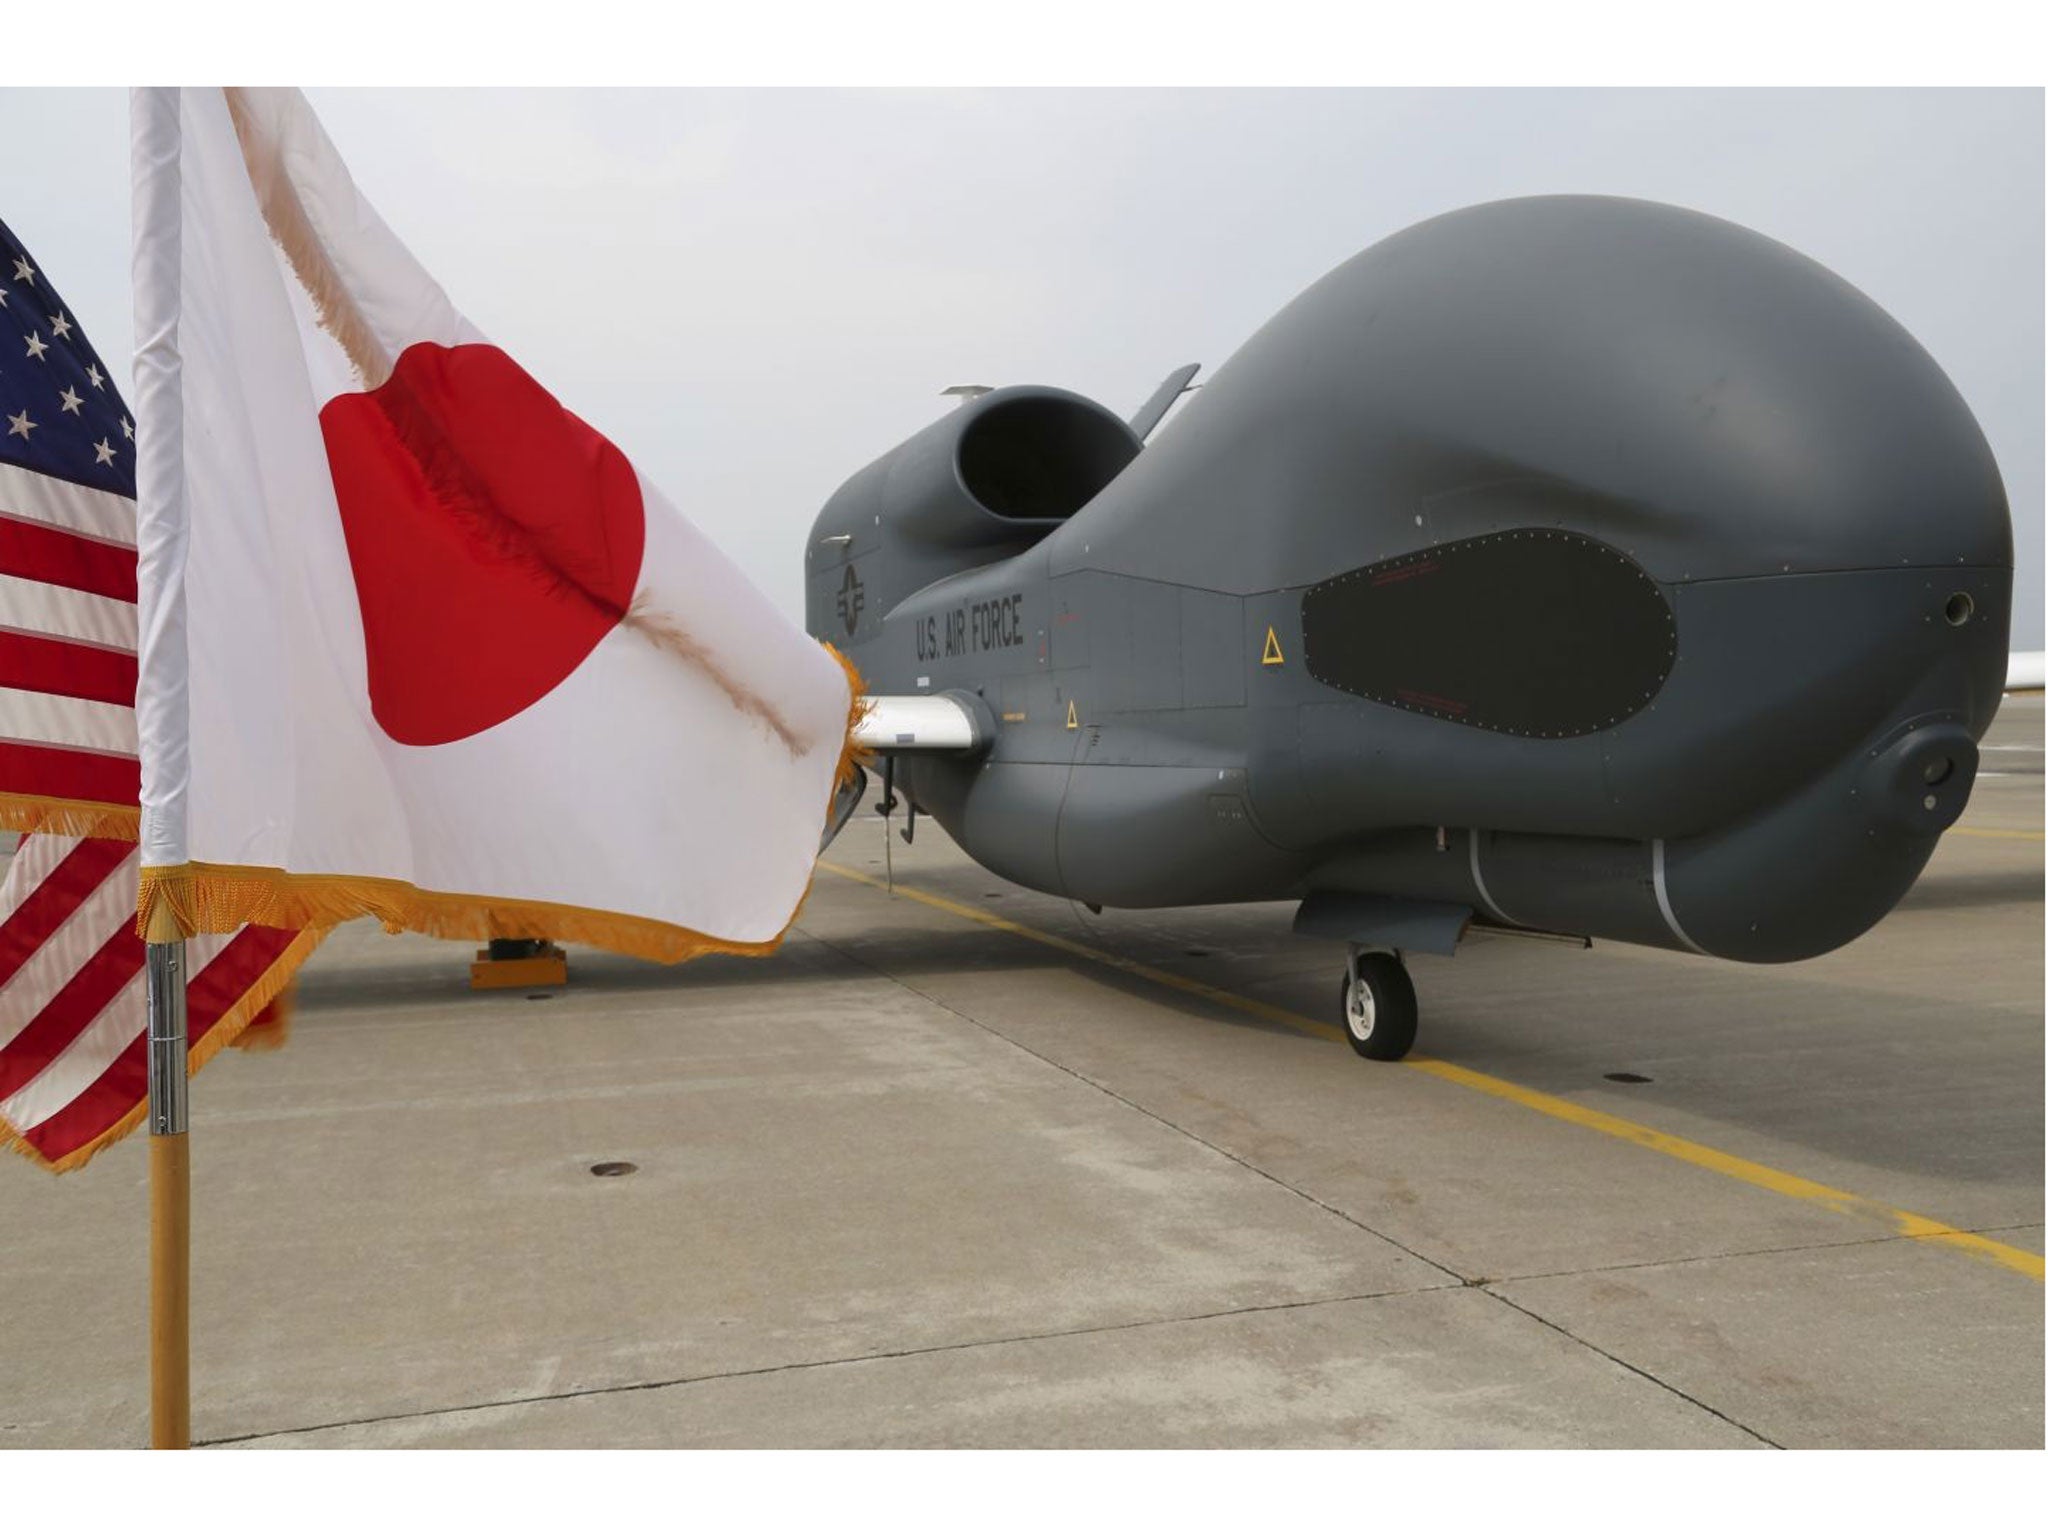 The arrival of the Global Hawk drones in Japan comes at a sensitive time in the region